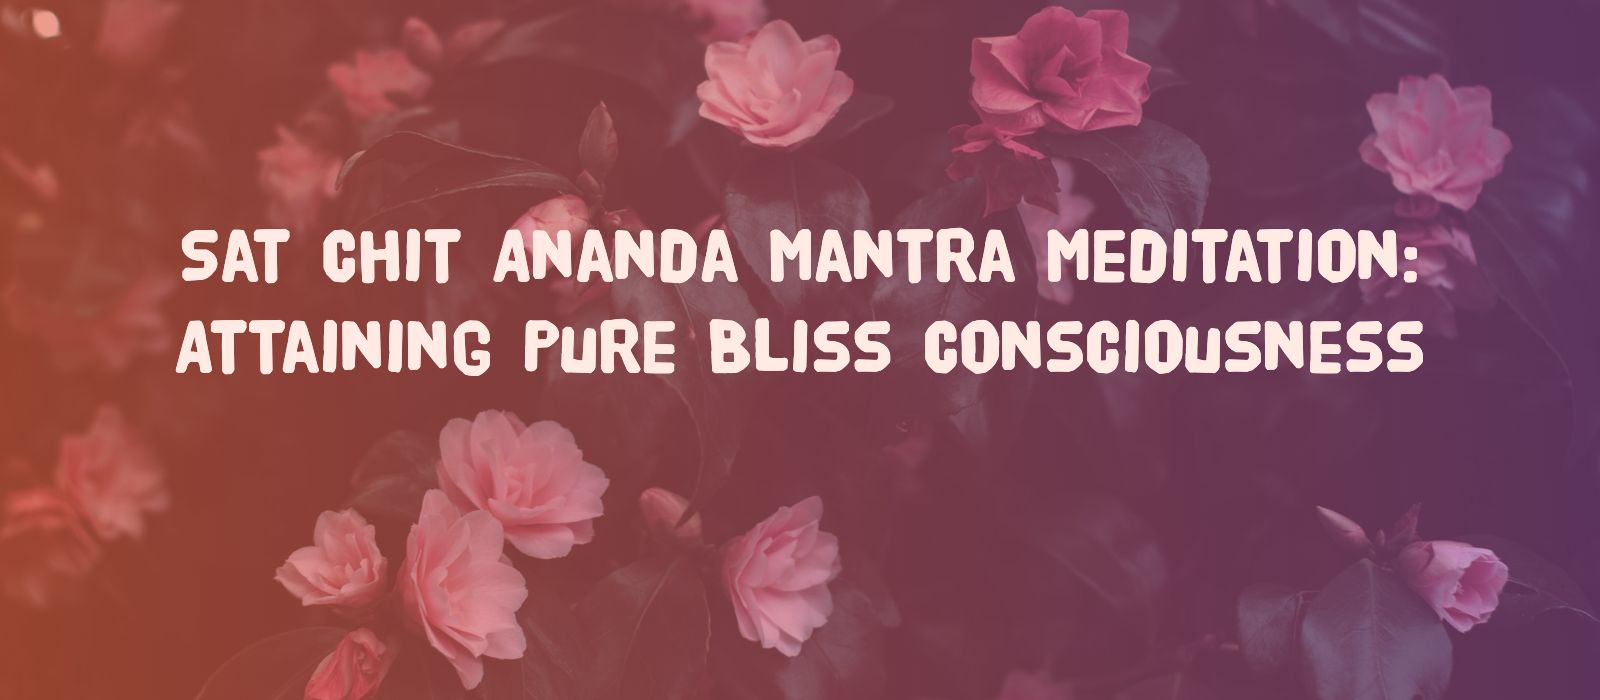 You are currently viewing Satcitananda Mantra Meditation – Attaining Pure Bliss Consciousness